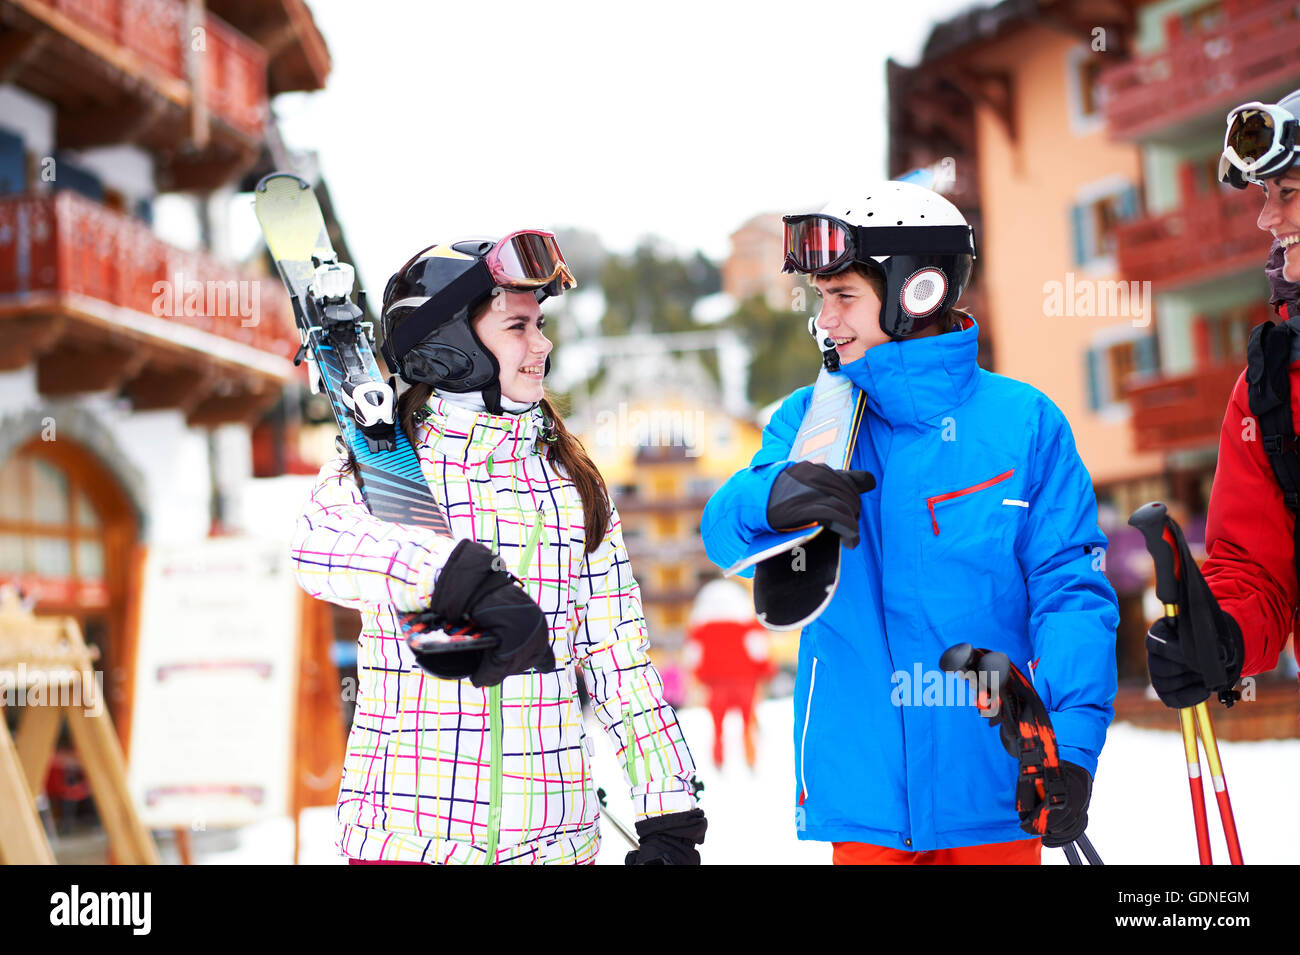 Teenager girl and boy, carrying skis Stock Photo